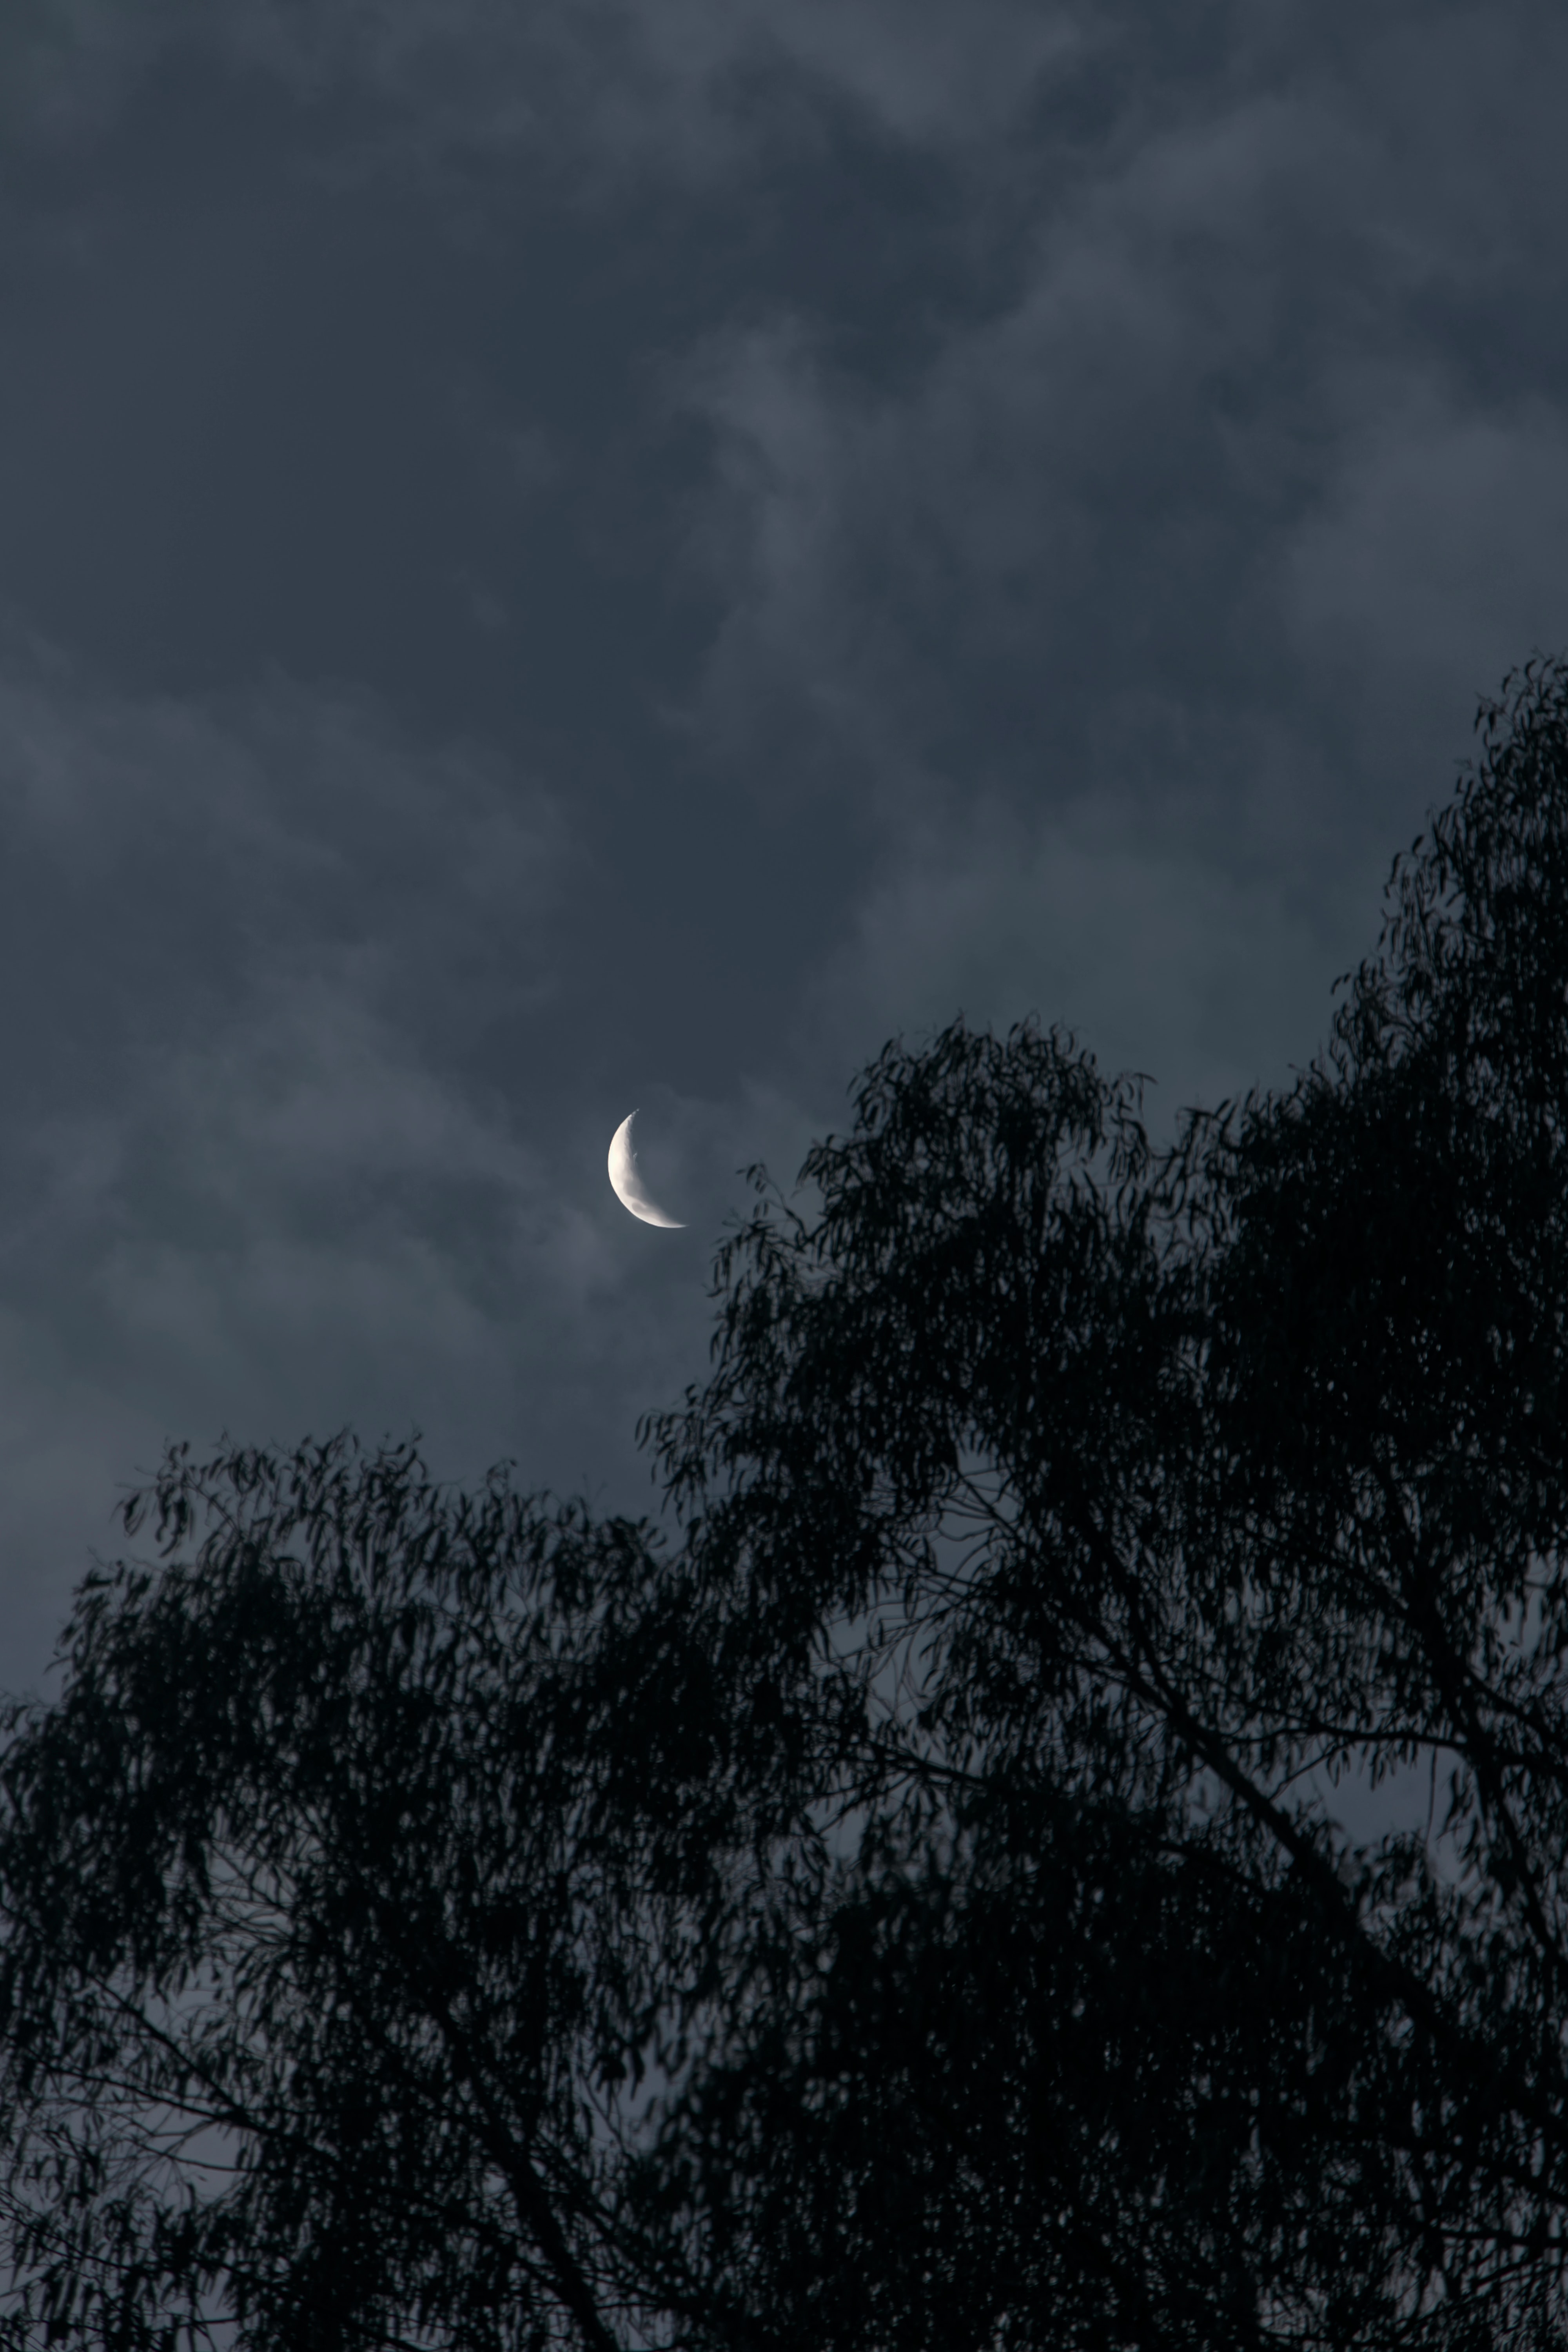 evening, moon, nature, trees, branches